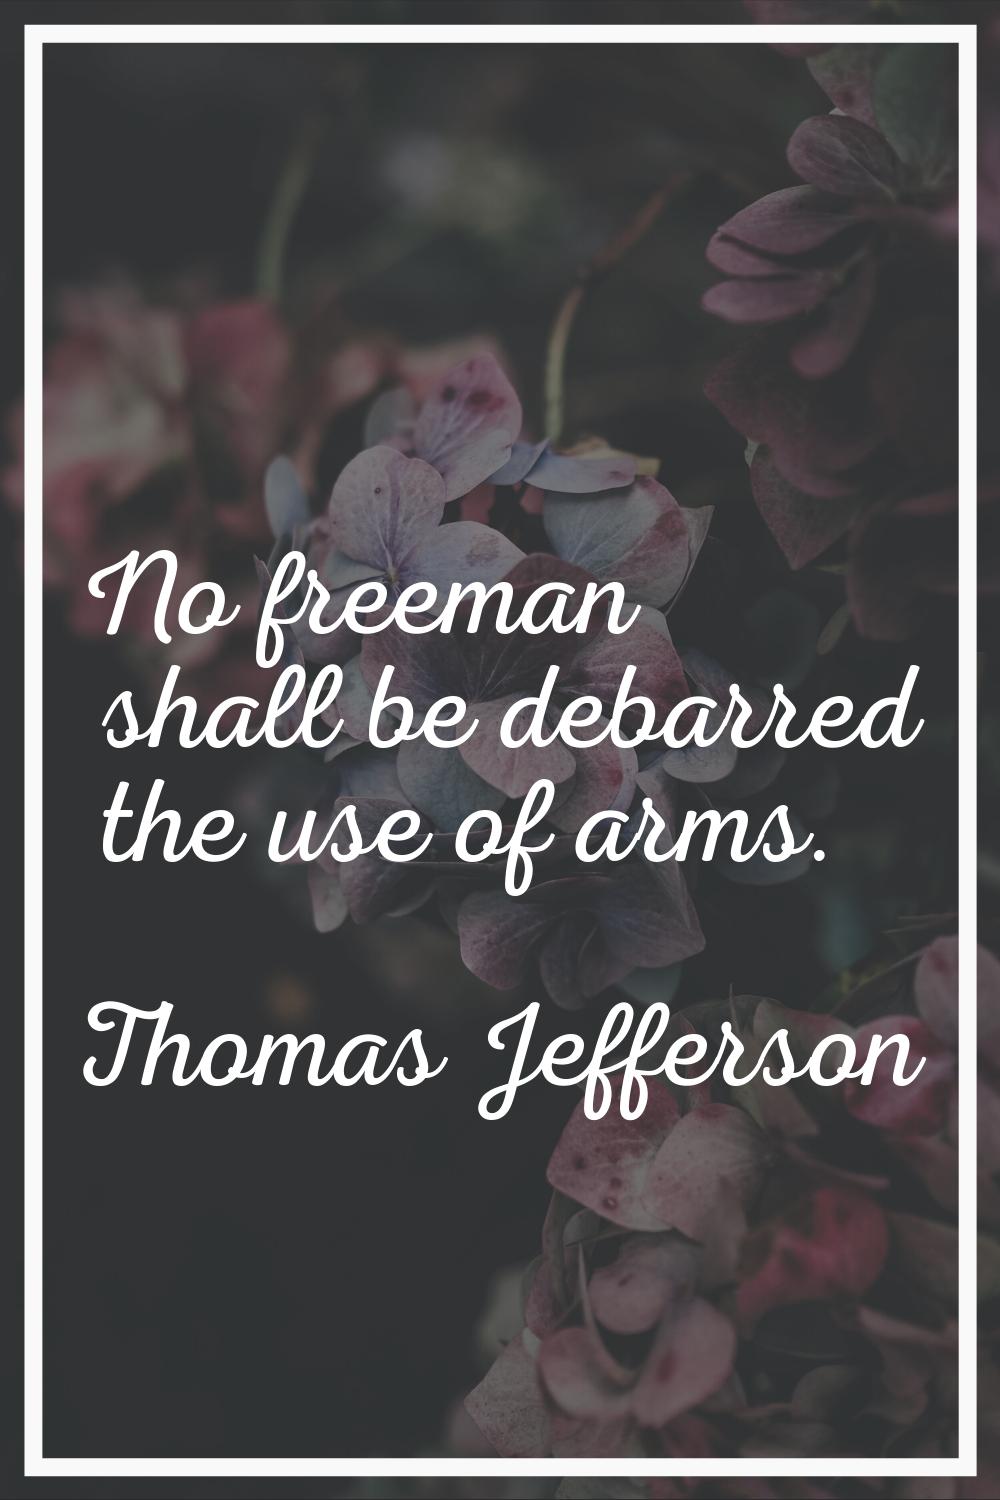 No freeman shall be debarred the use of arms.